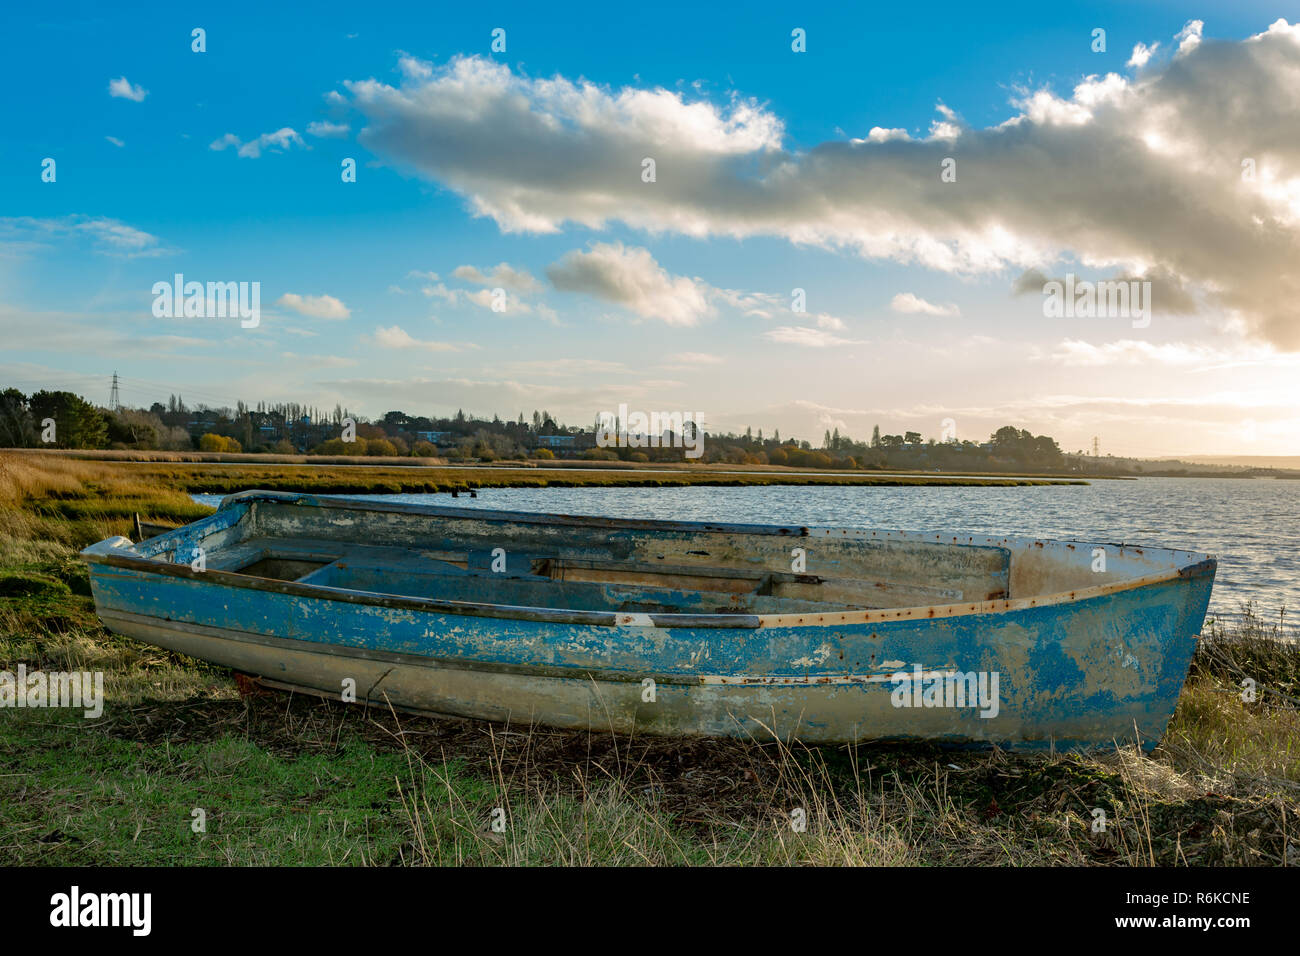 Landscape photograph of a wetland foreshore under a dramatic sky with derelict wooden boat in foreground. Stock Photo